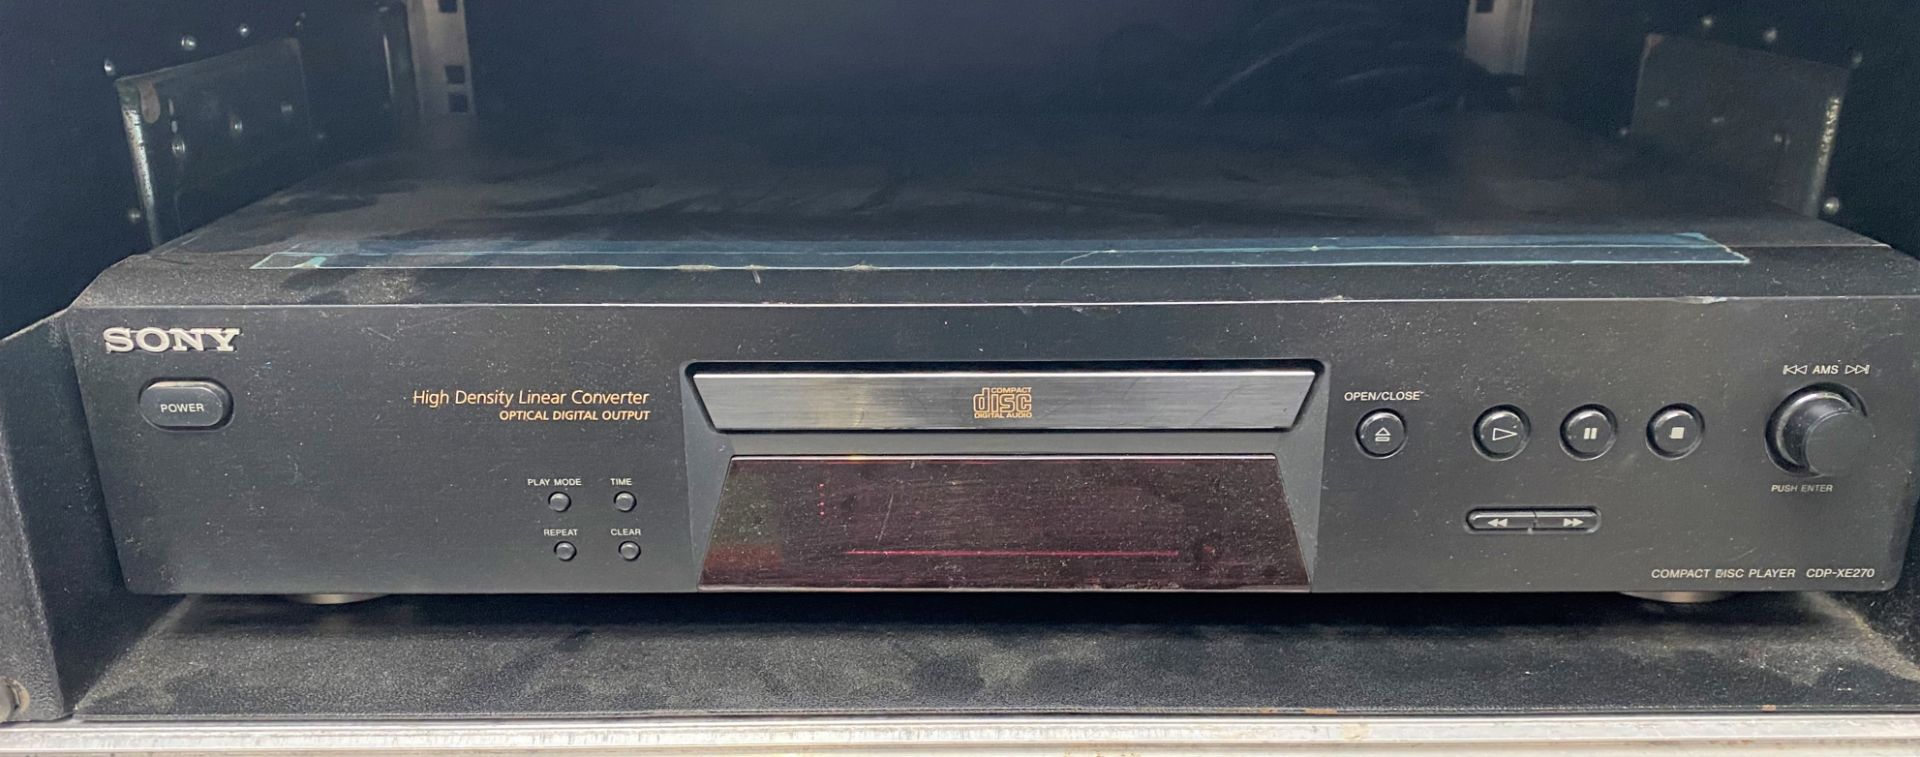 A Sony XE270 Compact Disc Player with flight case (not used for over 12 months-working when last